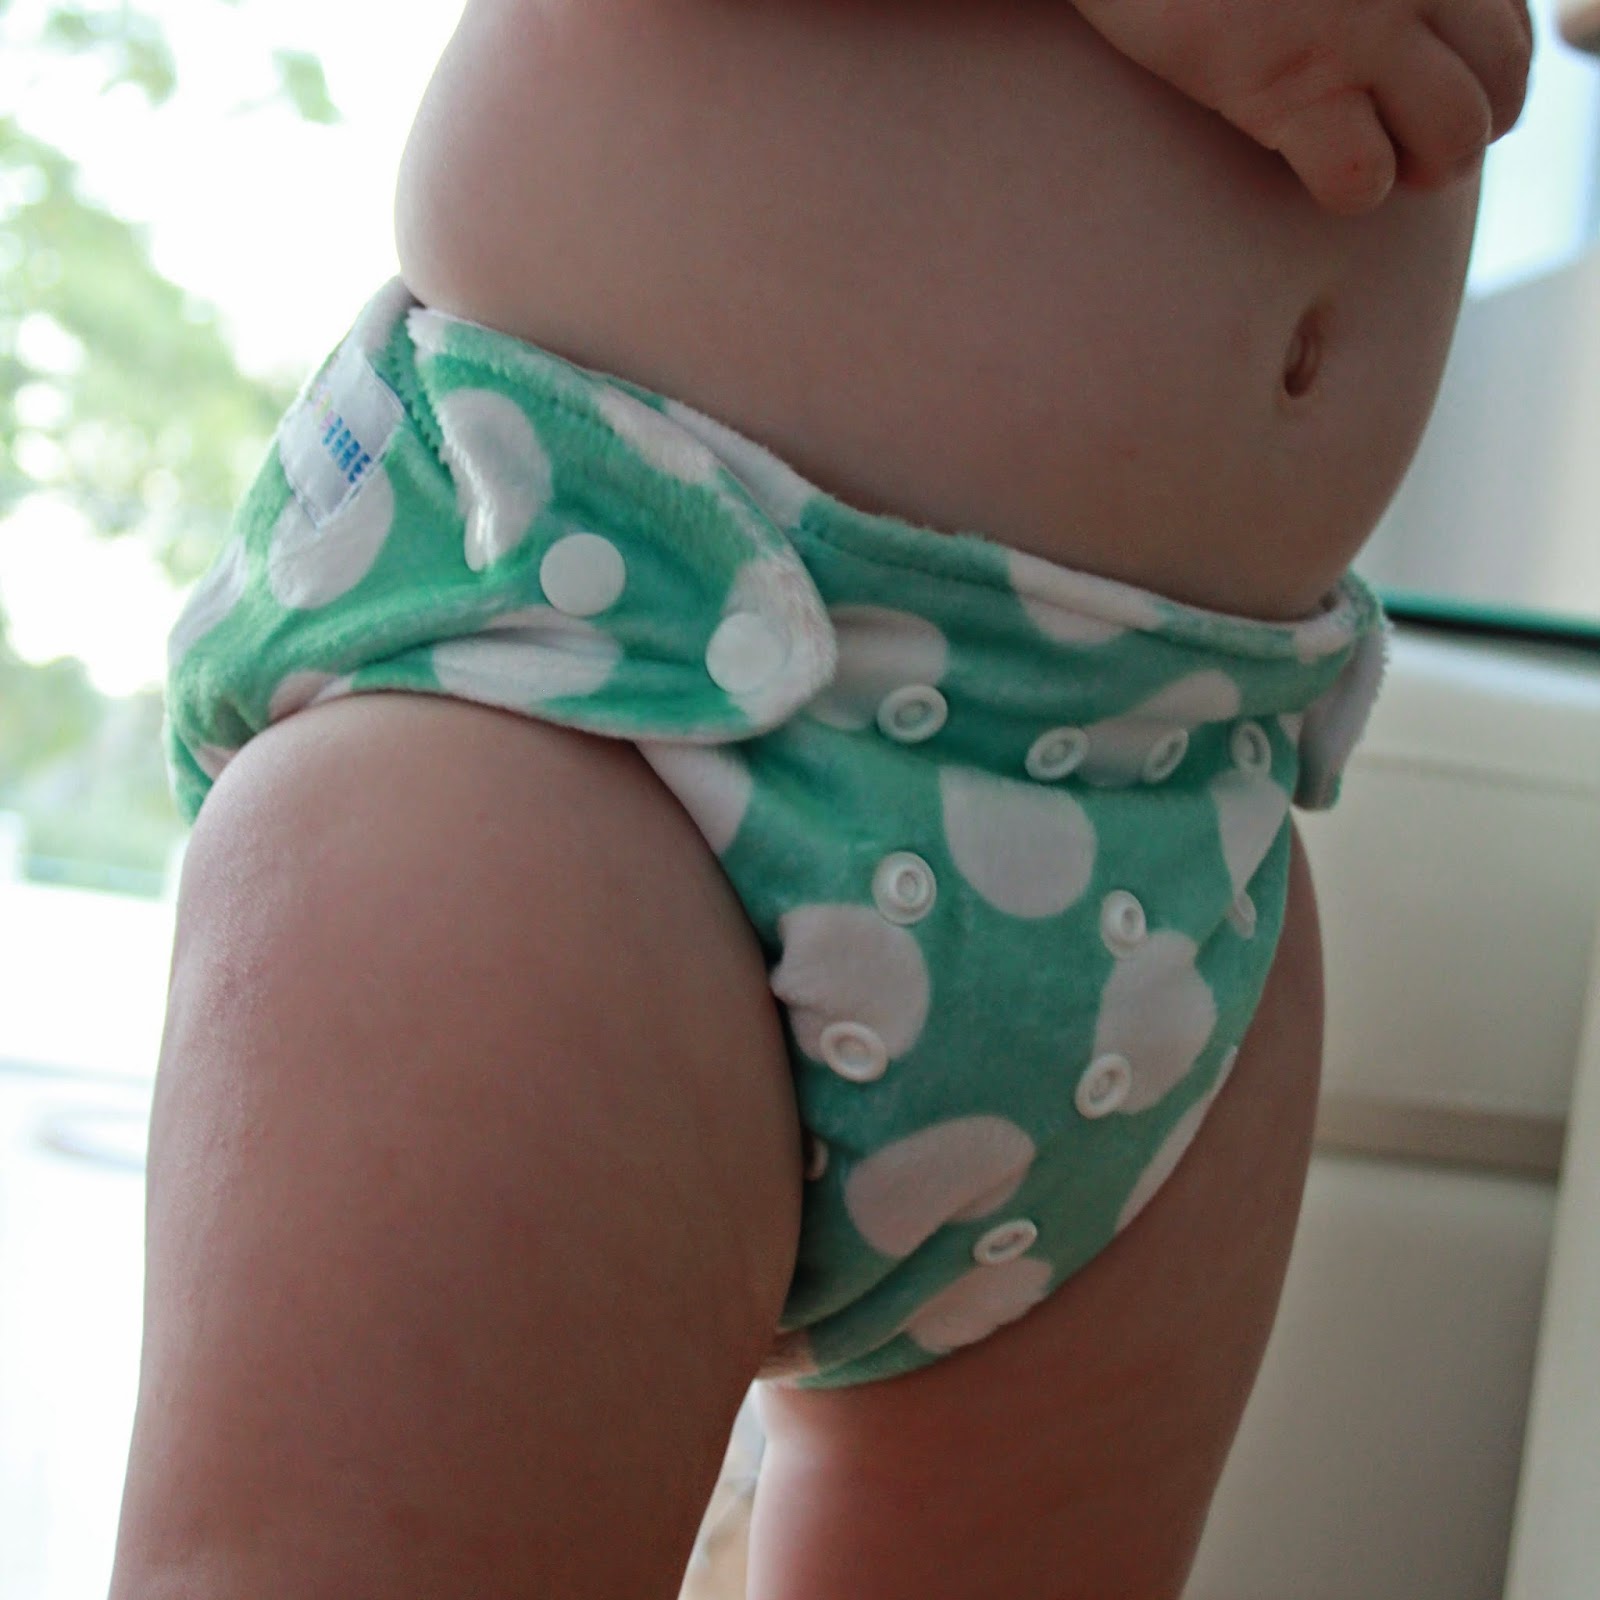 You can see the snaps across the front of this nappy and how the wings wrap around to the front to snap the nappy on to your child.